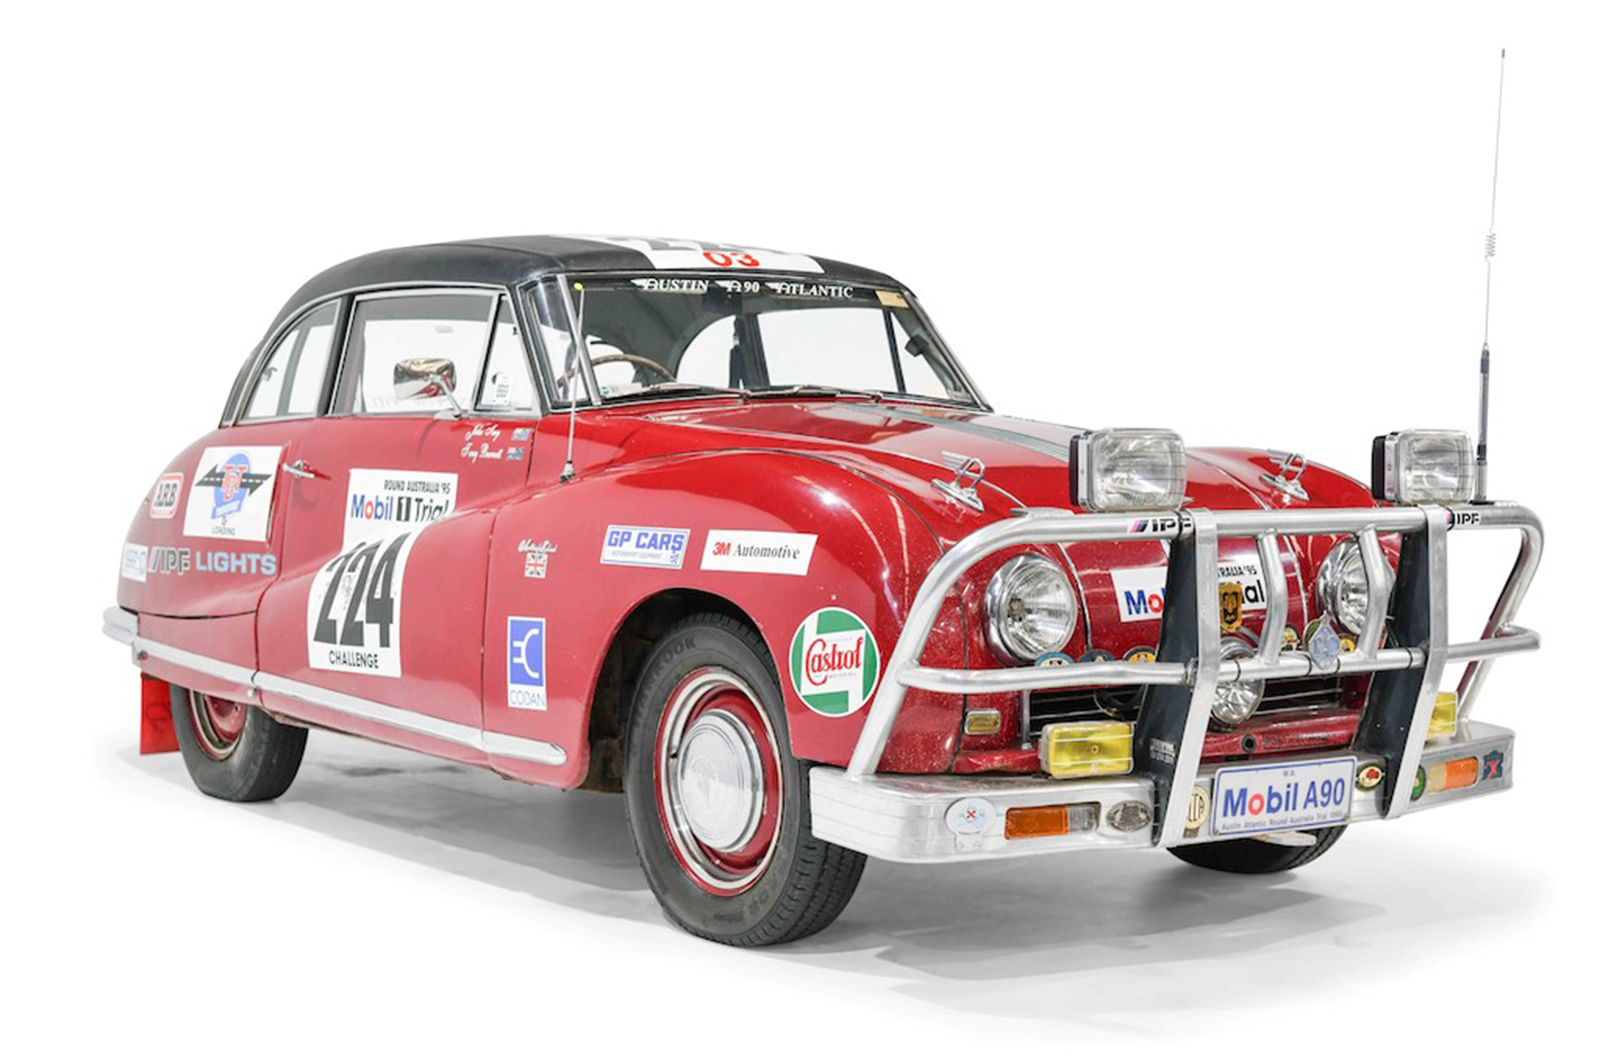 Classic & Sports Car – Entire Australian museum collection for sale next Sunday